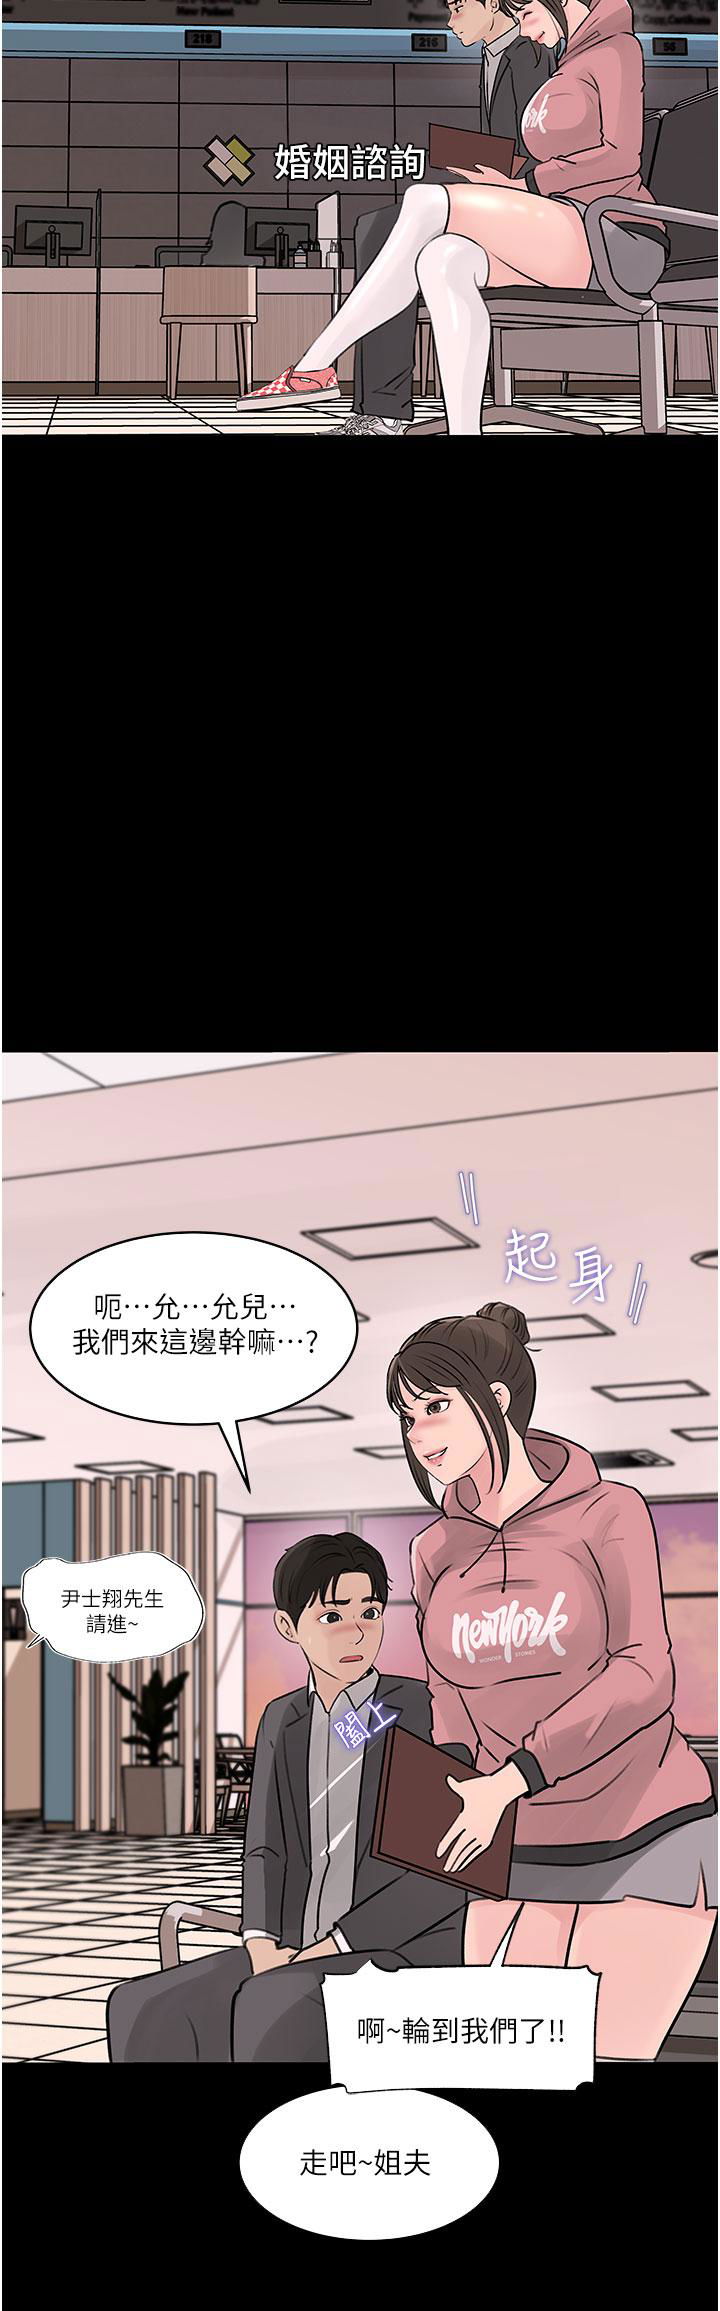 in-my-sister-in-law-raw-chap-31-18